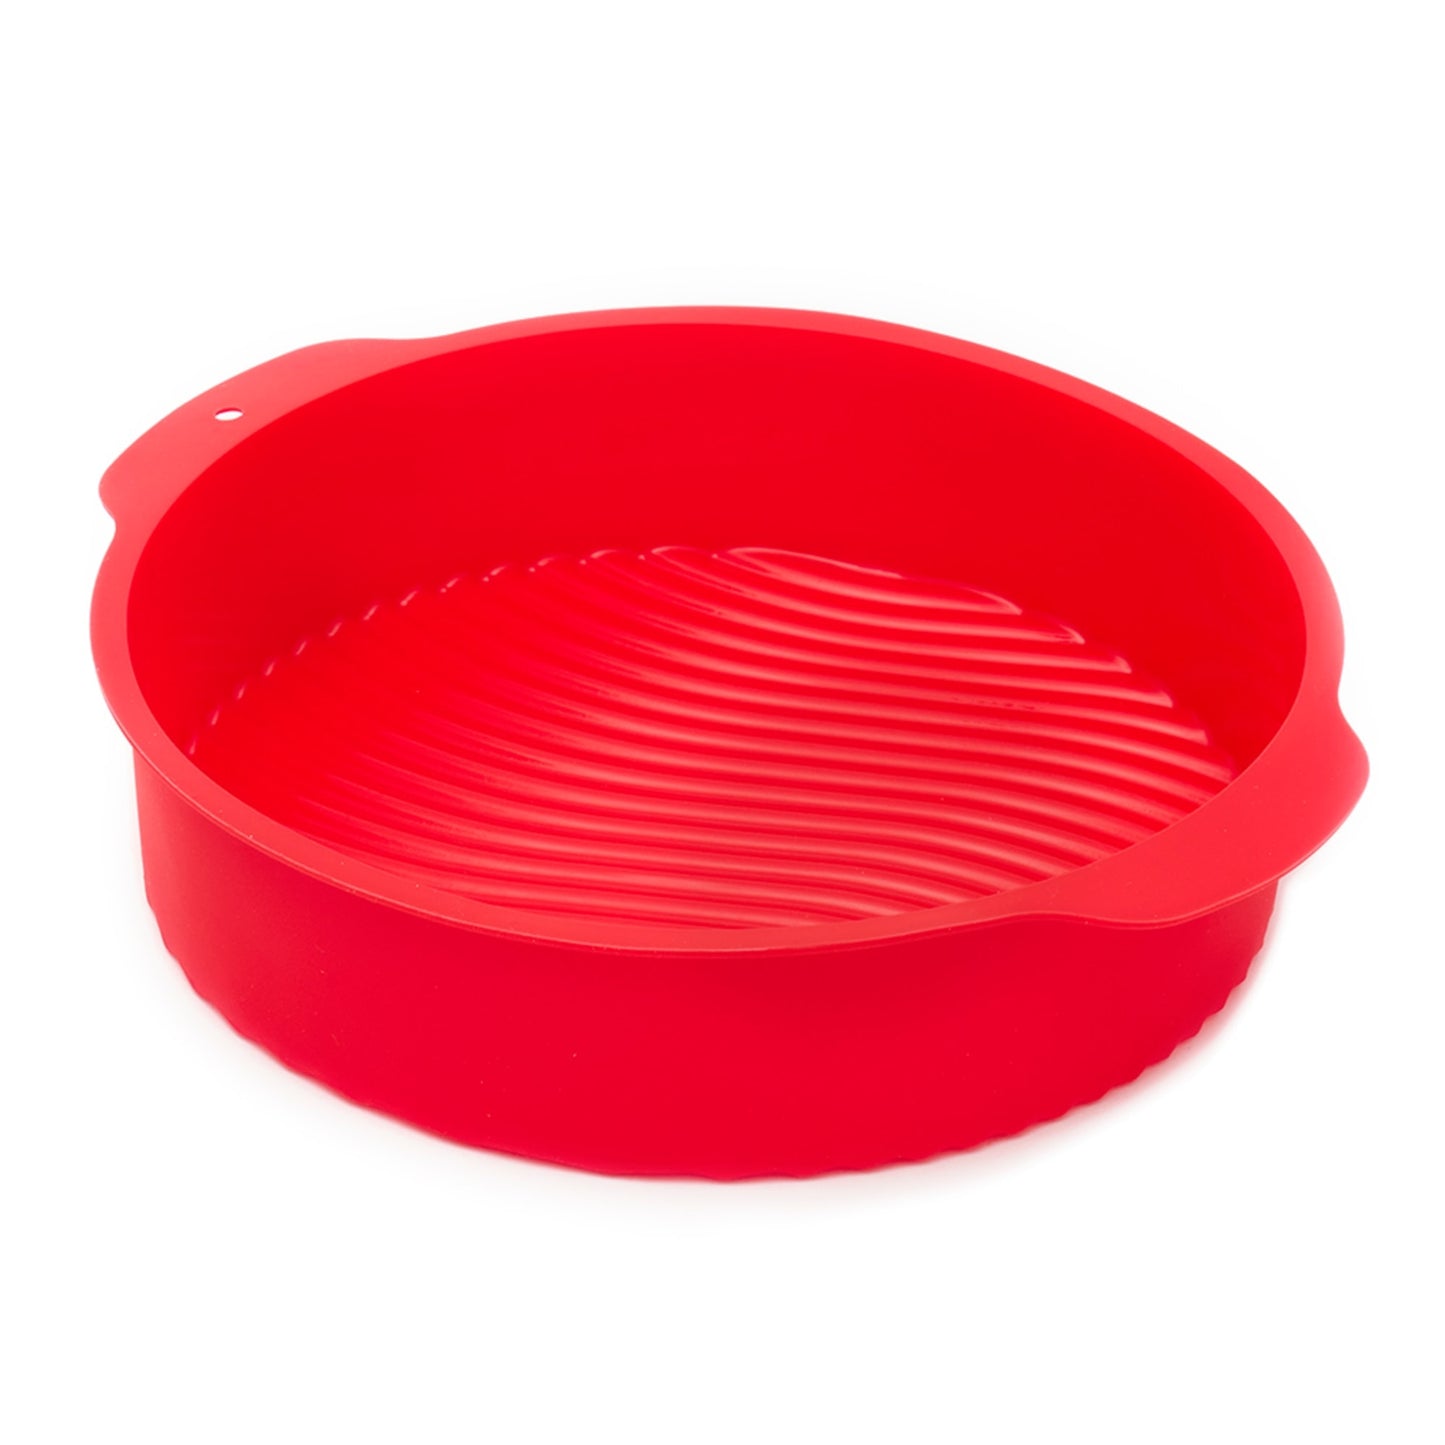 Silicone Pie Pan